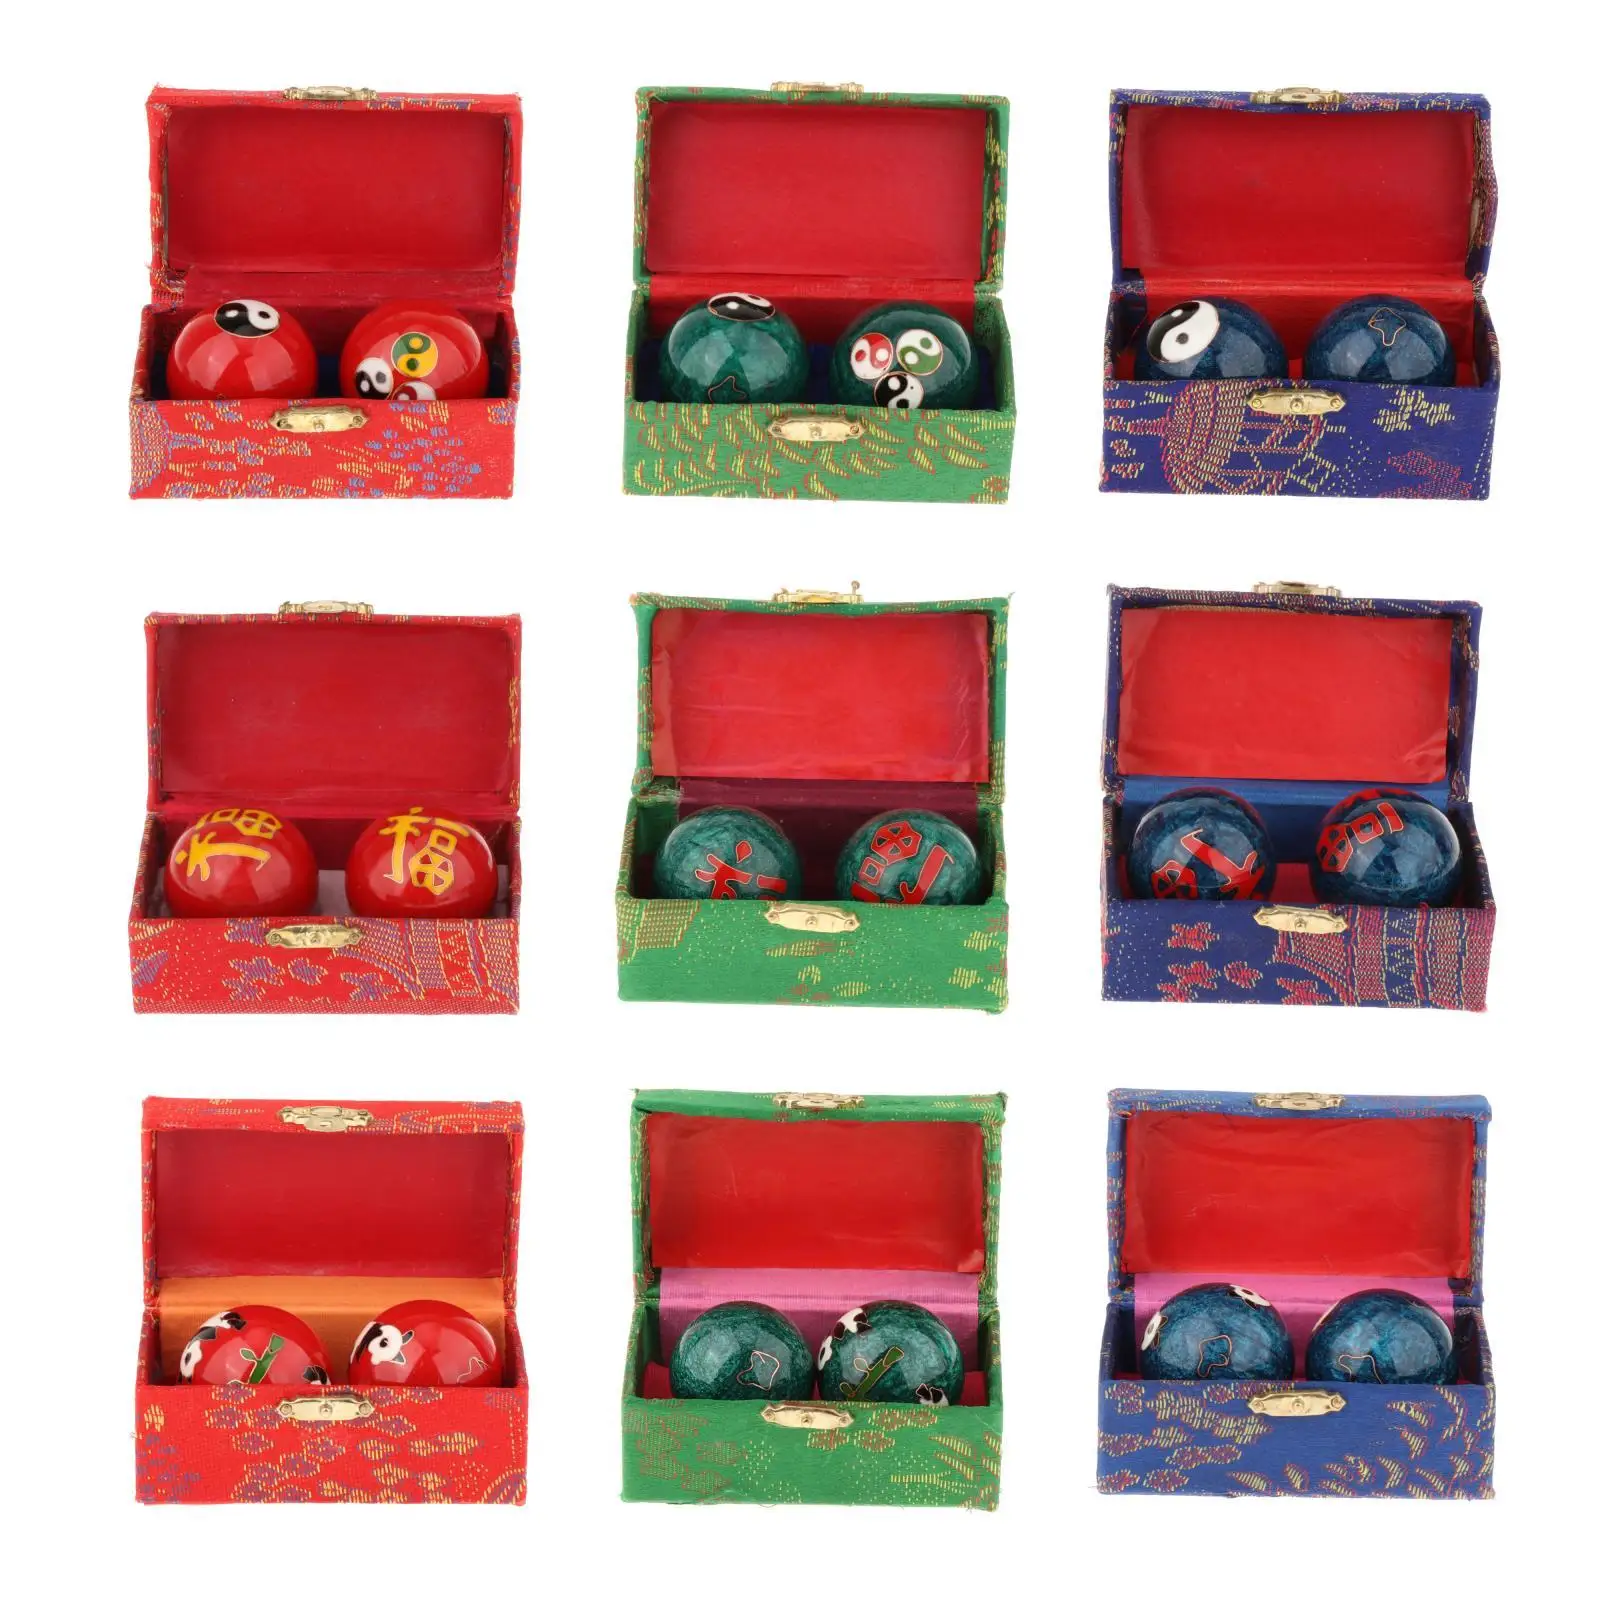 2 Pieces Hand Massage Balls with Storage Box for Children Middle Aged People